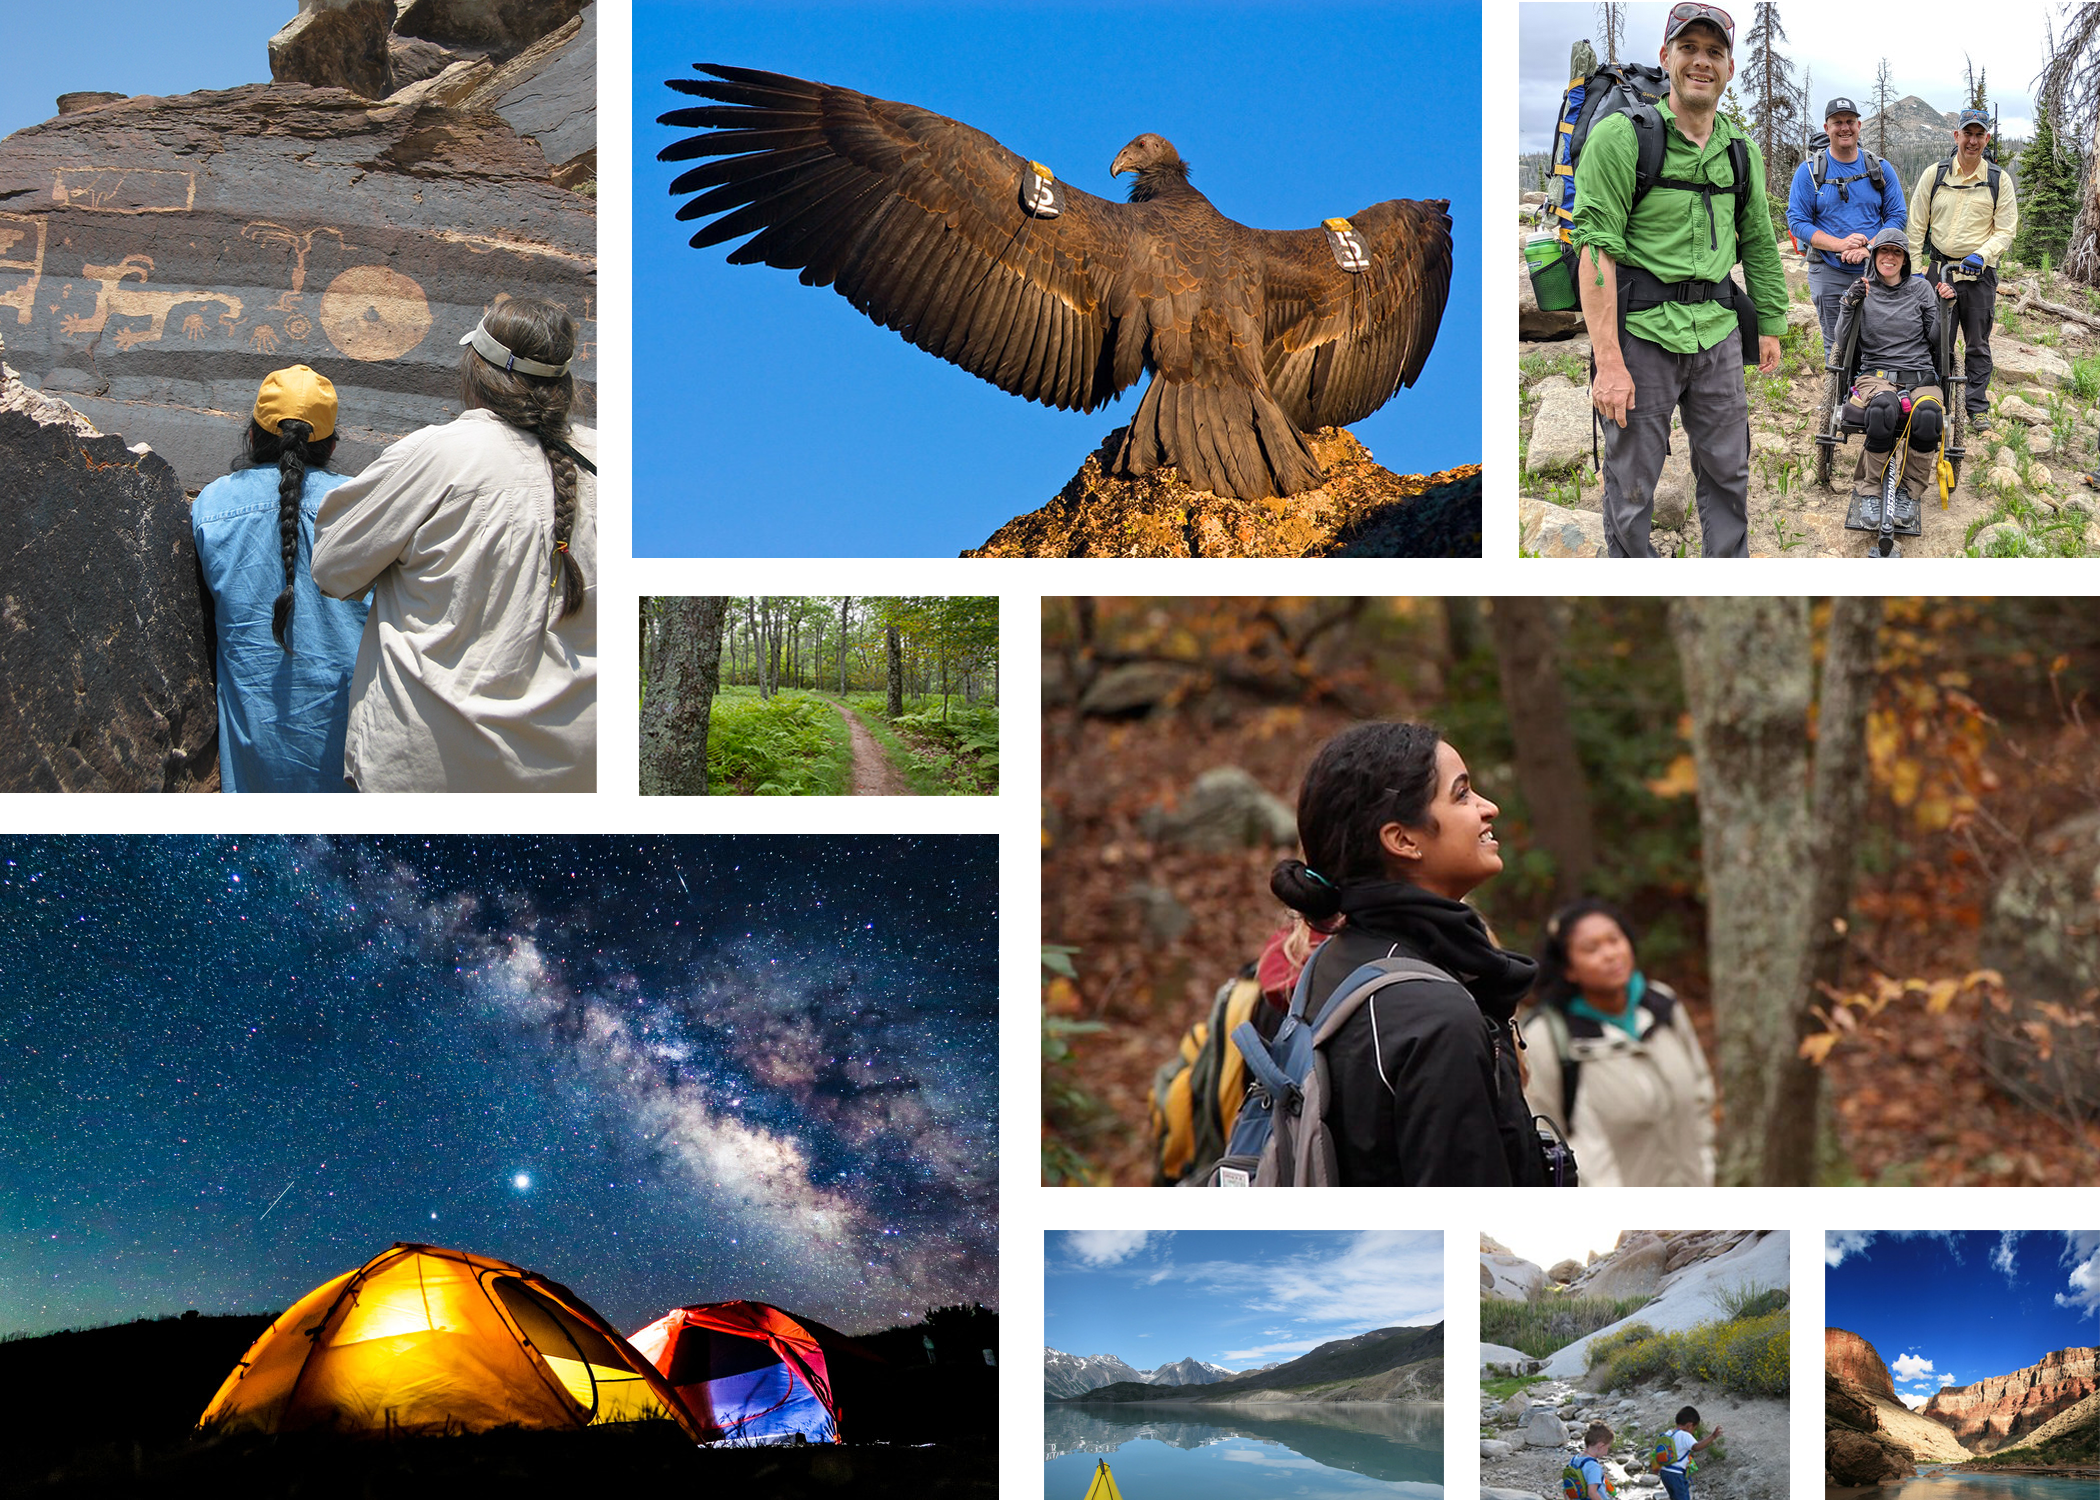 Collage of images featuring people in different wilderness areas.